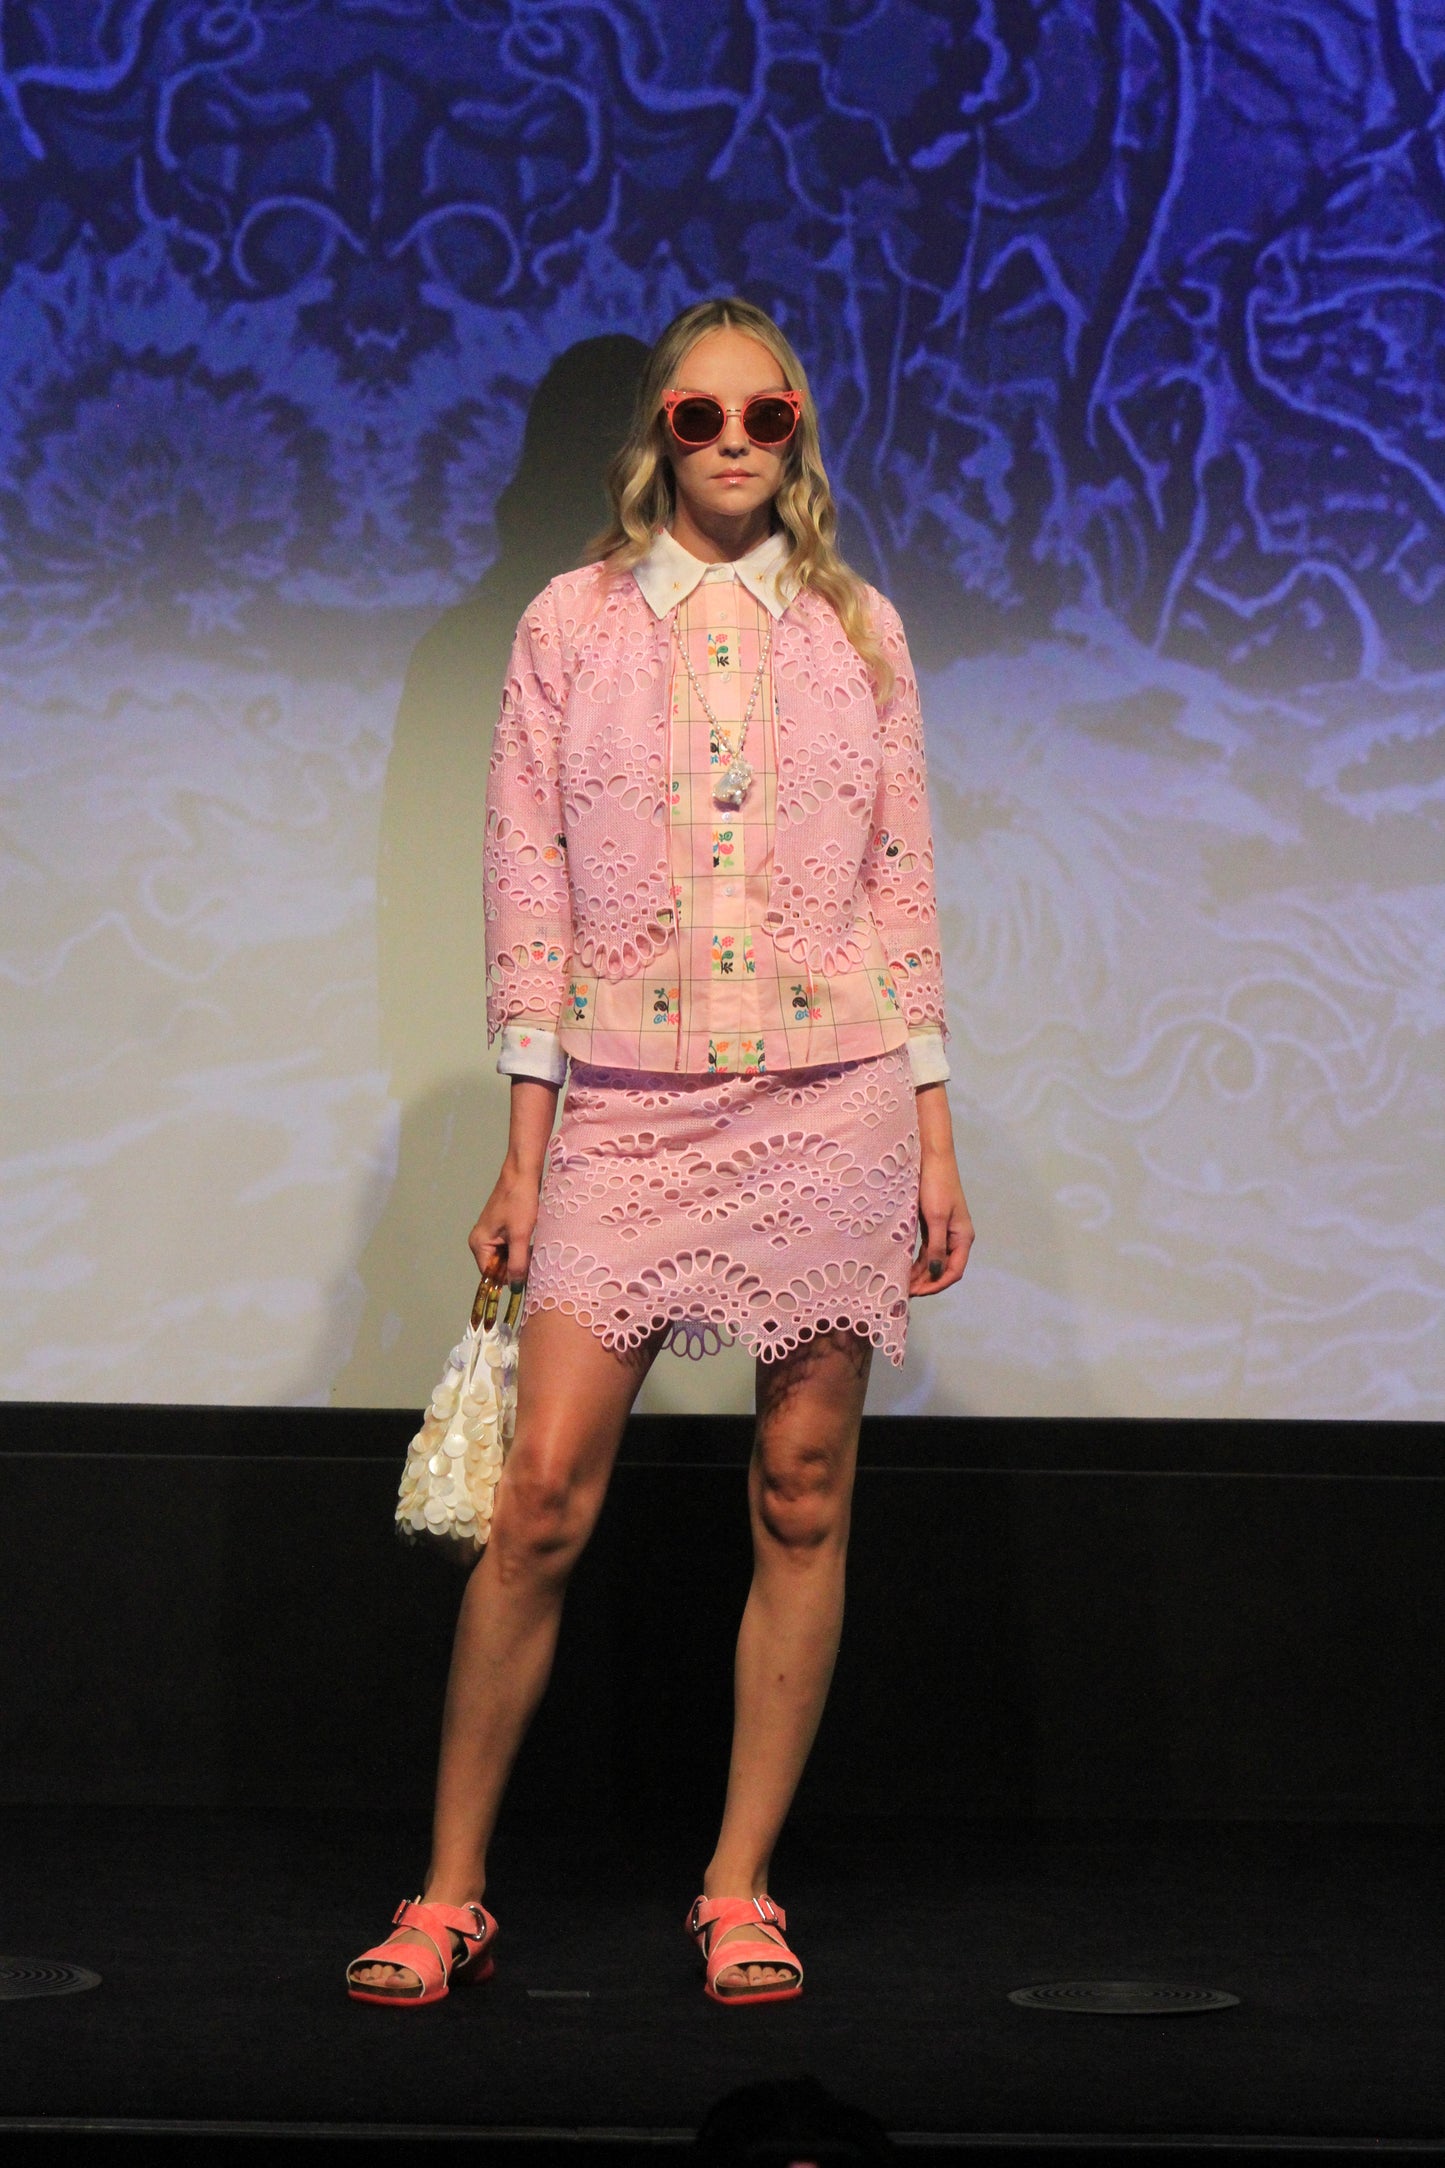 Under runway lights, Eyelet Jacket, pink with from small to large oval eyelets, wavy bottom hem